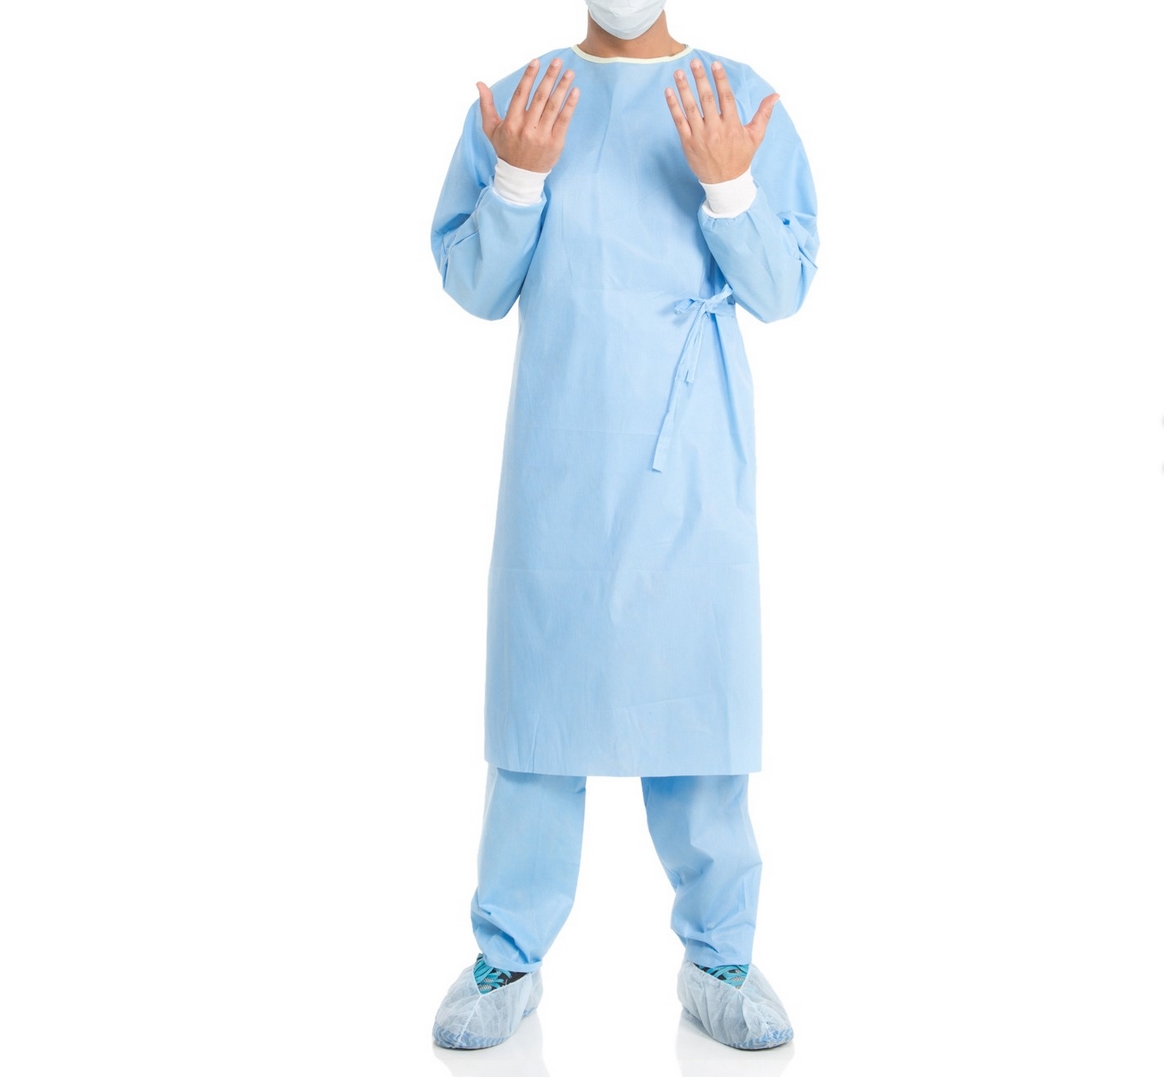  Non-Reinforced Surgical Gowns with Raglan Sleeves